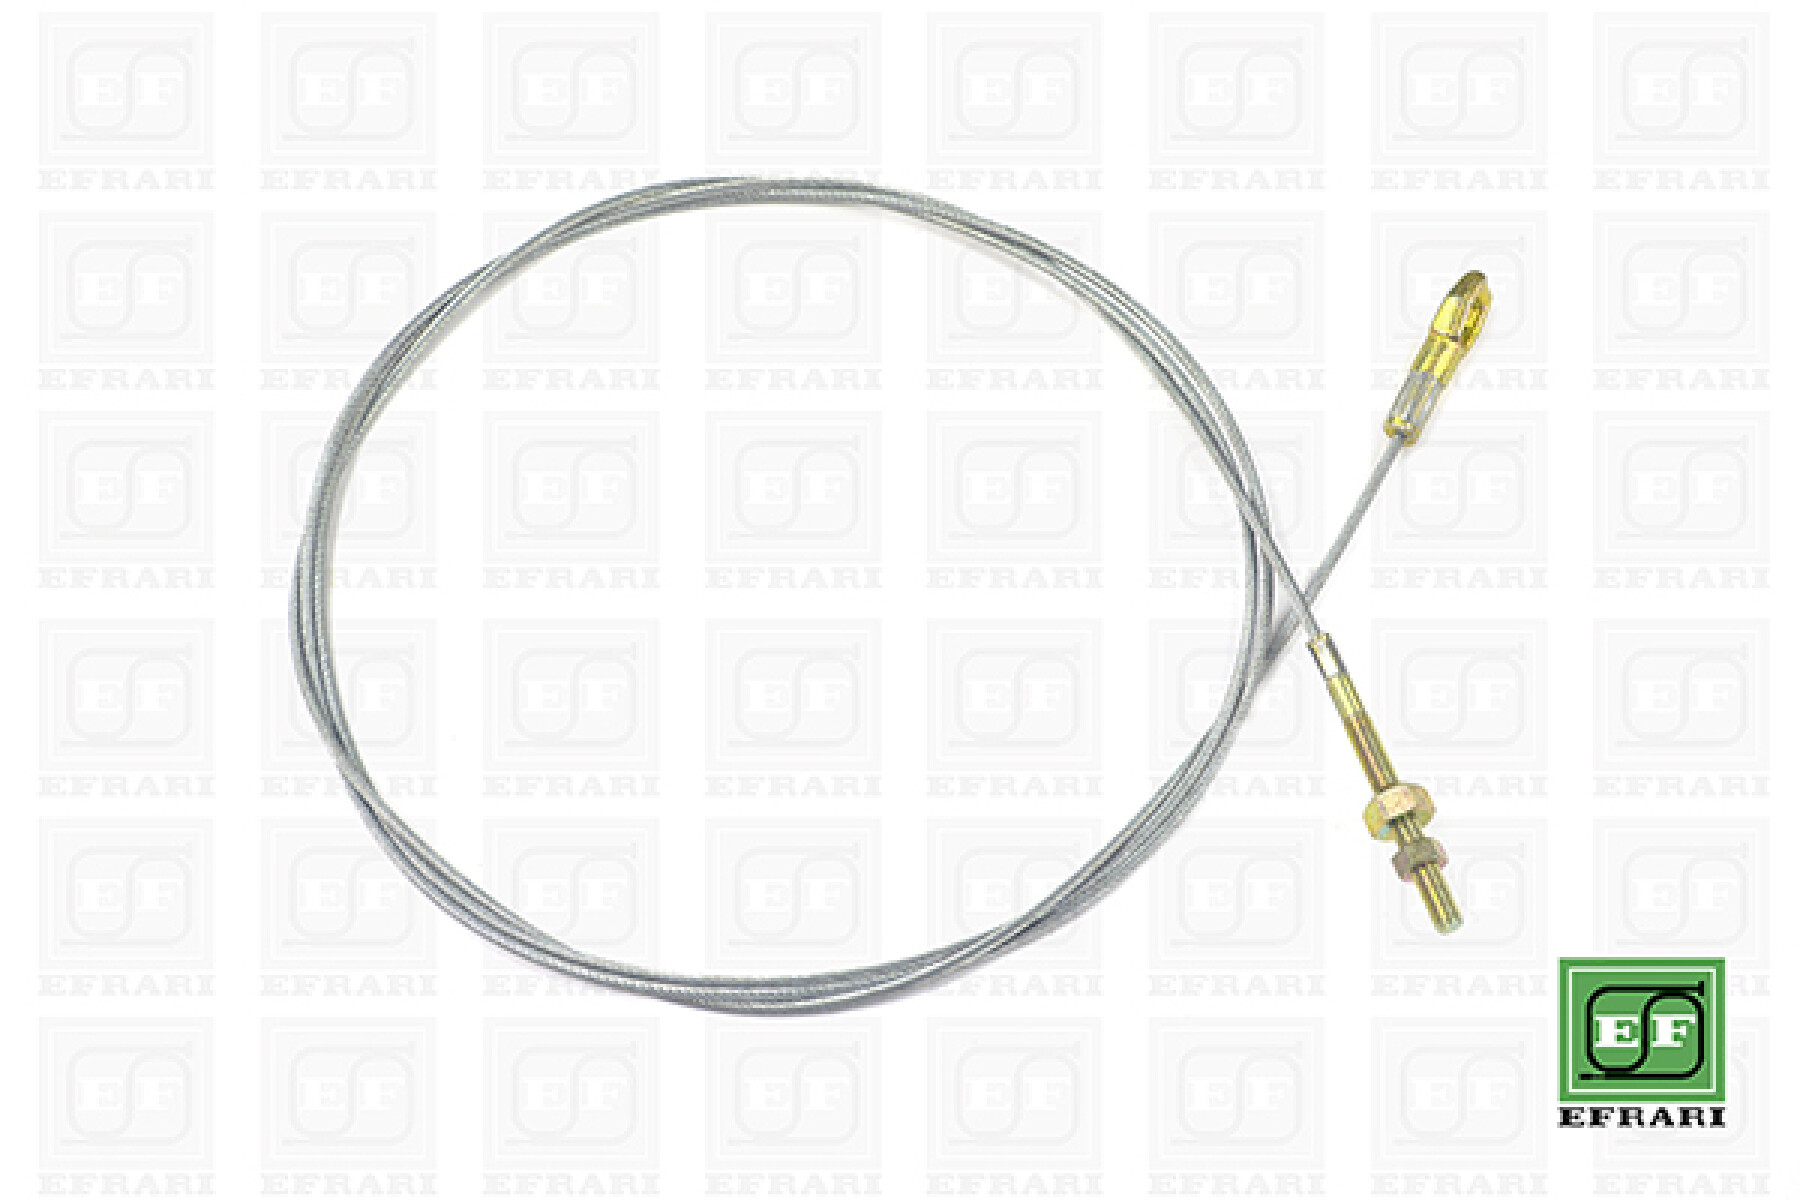 CABLE EMBRAGUE VOLKSWAGEN FUSCA1200 1300 2260MM (EF703A) - 